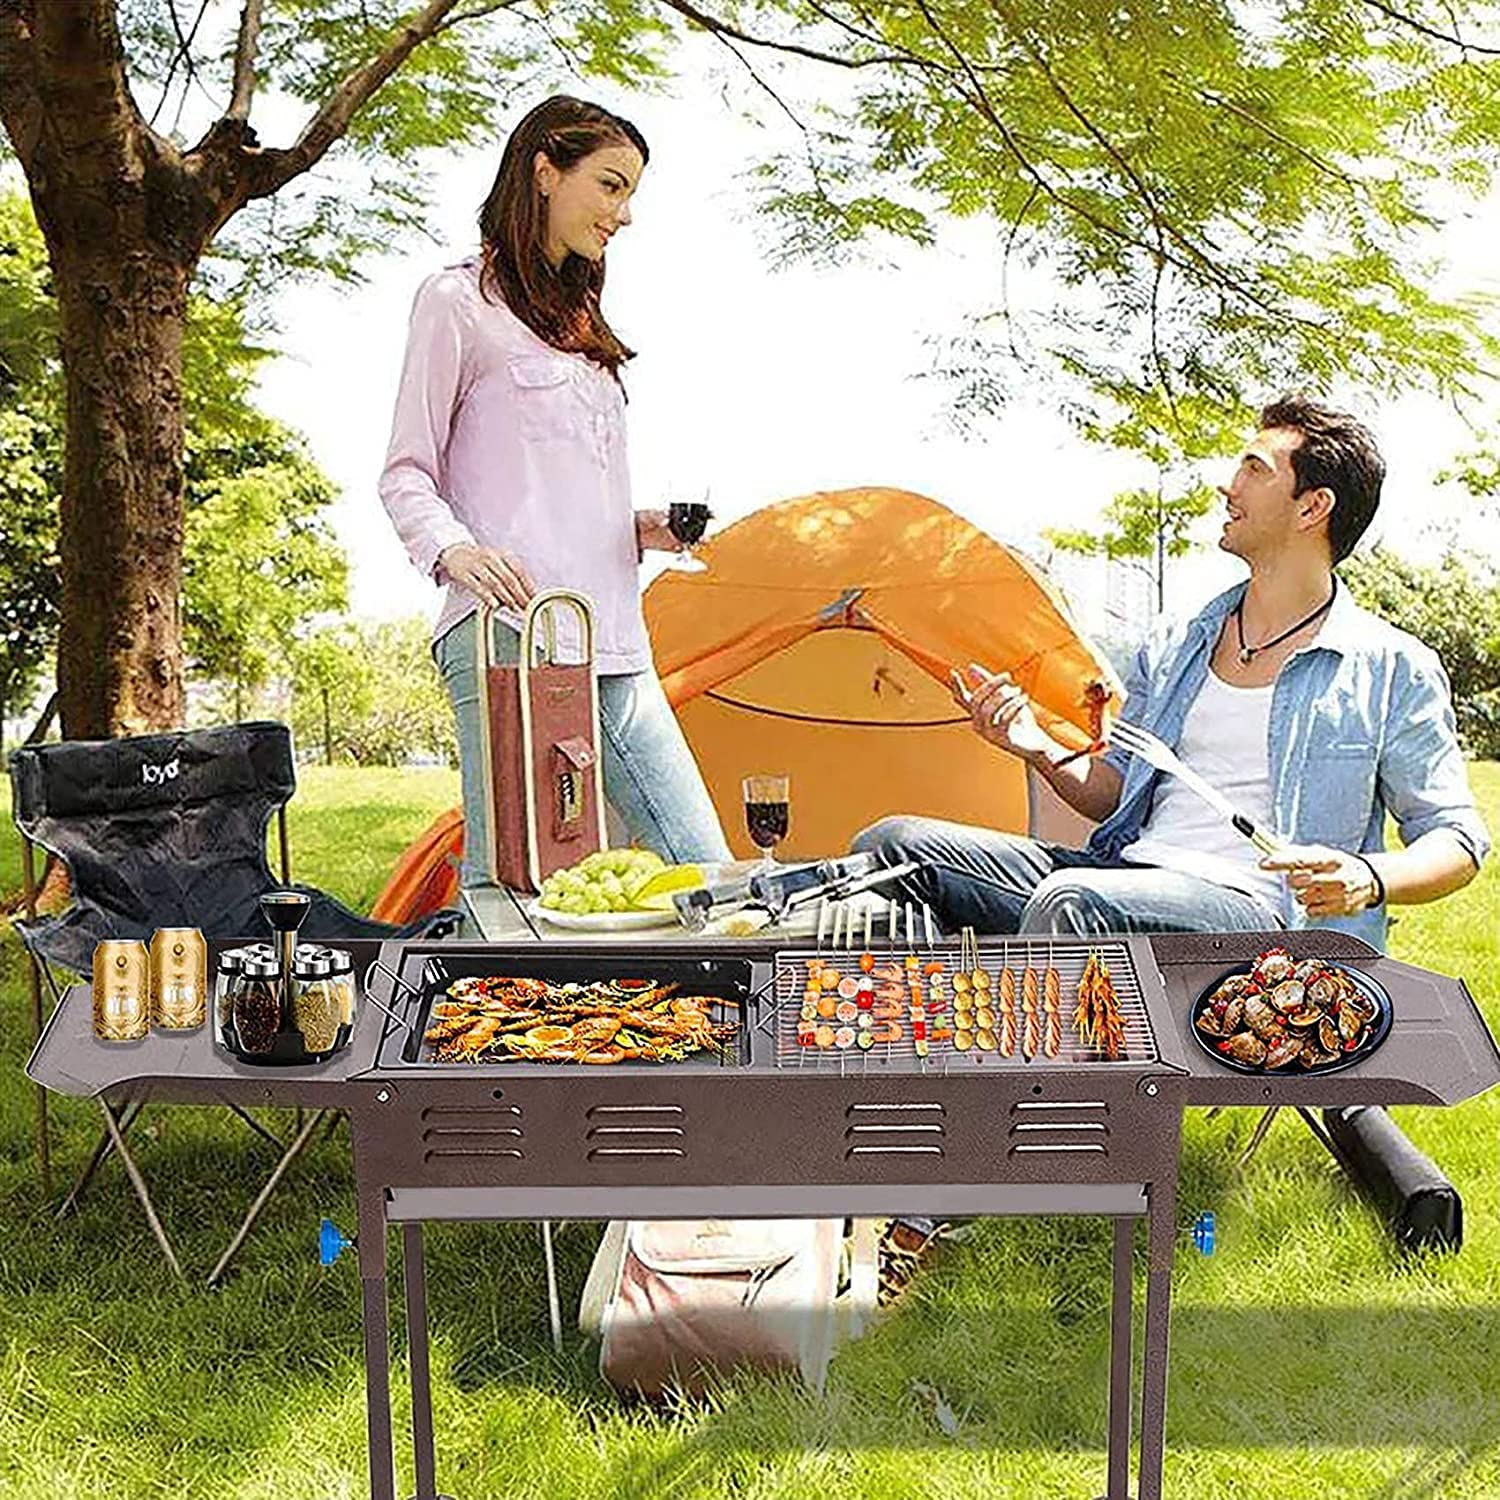 VIO Charcoal Grill Portable BBQ Grill Folding Barbecue Grill Charcoal Shish Kebab Grill Stainless Steel Camping Grill for Outdoor Picnic, Patio, Backyard & Camping, Suitable For 5-15 People